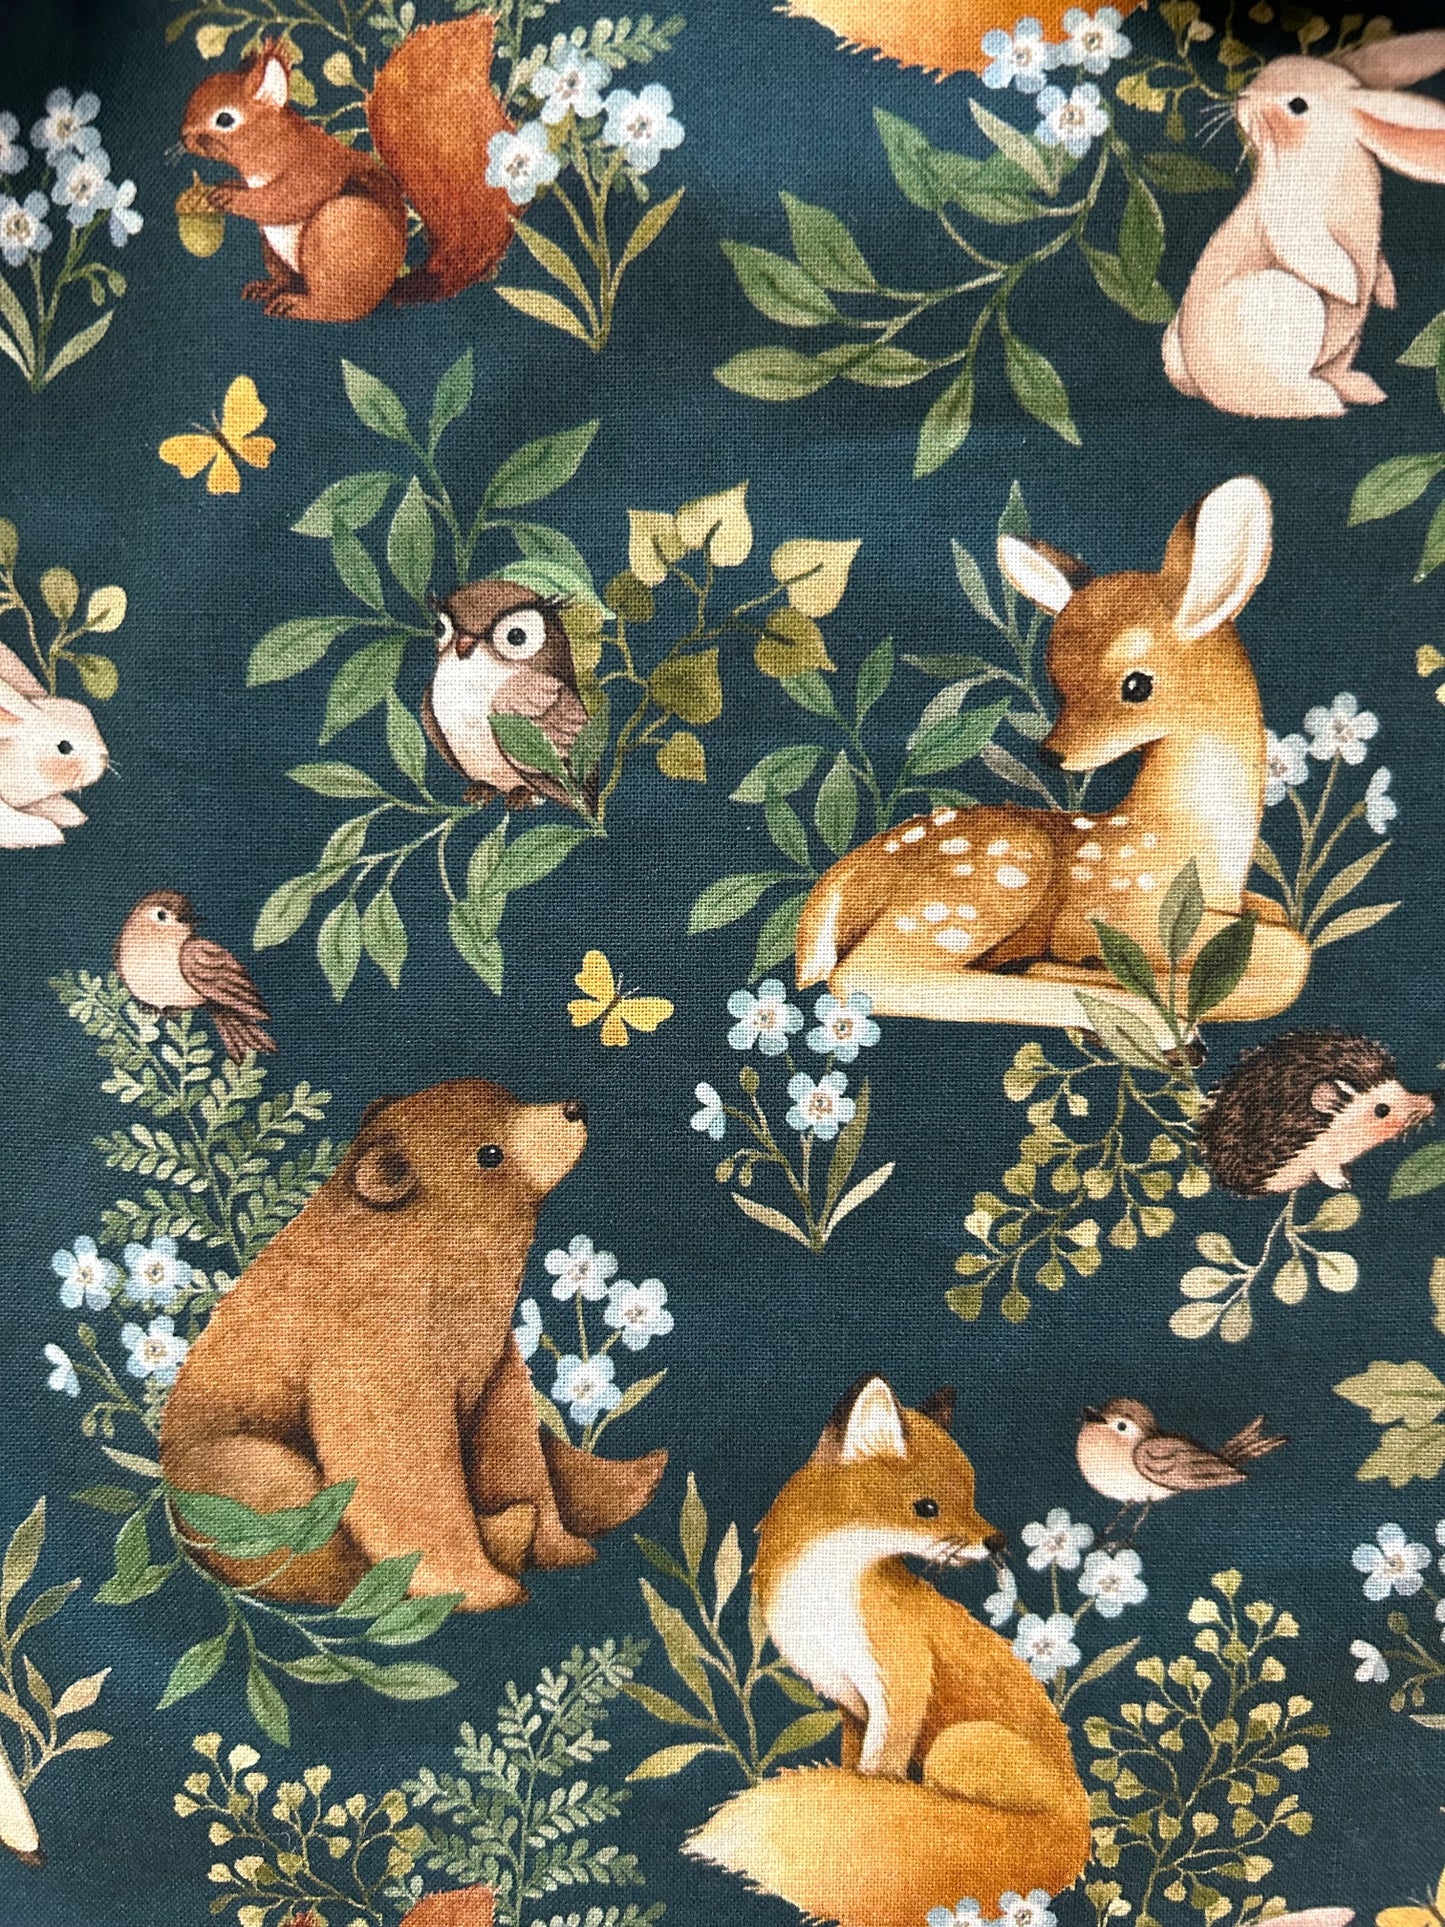 a close up of the fabric showing the deer, bear, owls, birds and branches